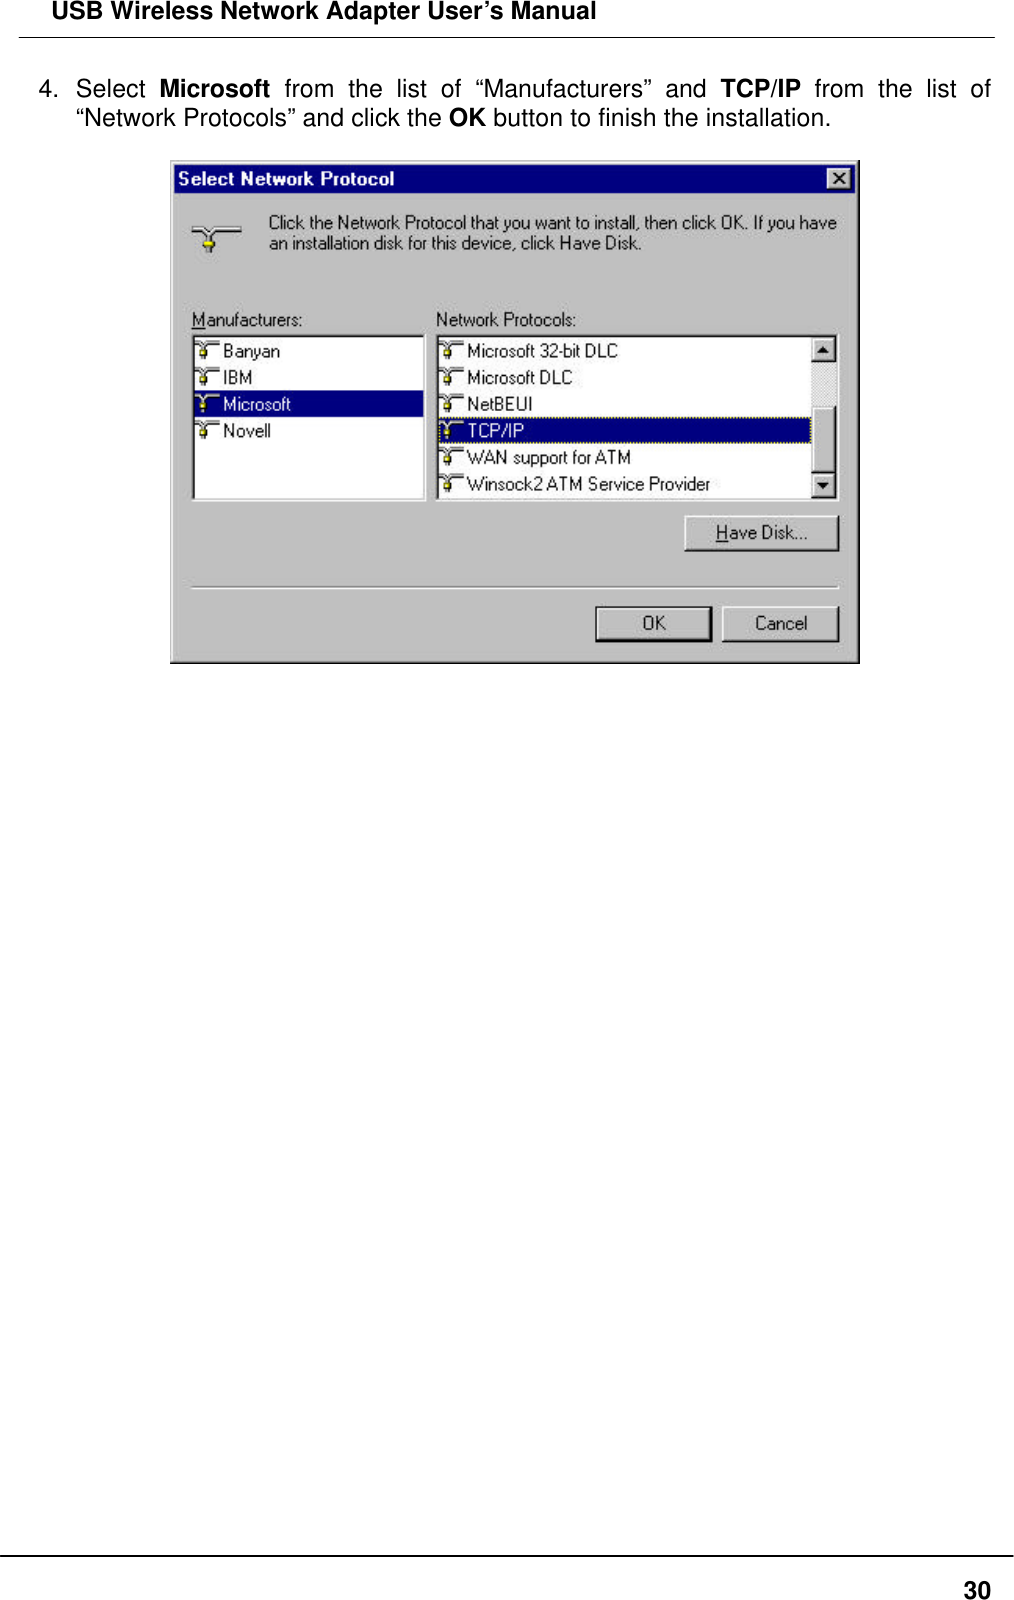  USB Wireless Network Adapter User’s Manual  304. Select Microsoft from the list of “Manufacturers” and  TCP/IP from the list of “Network Protocols” and click the OK button to finish the installation.                                      